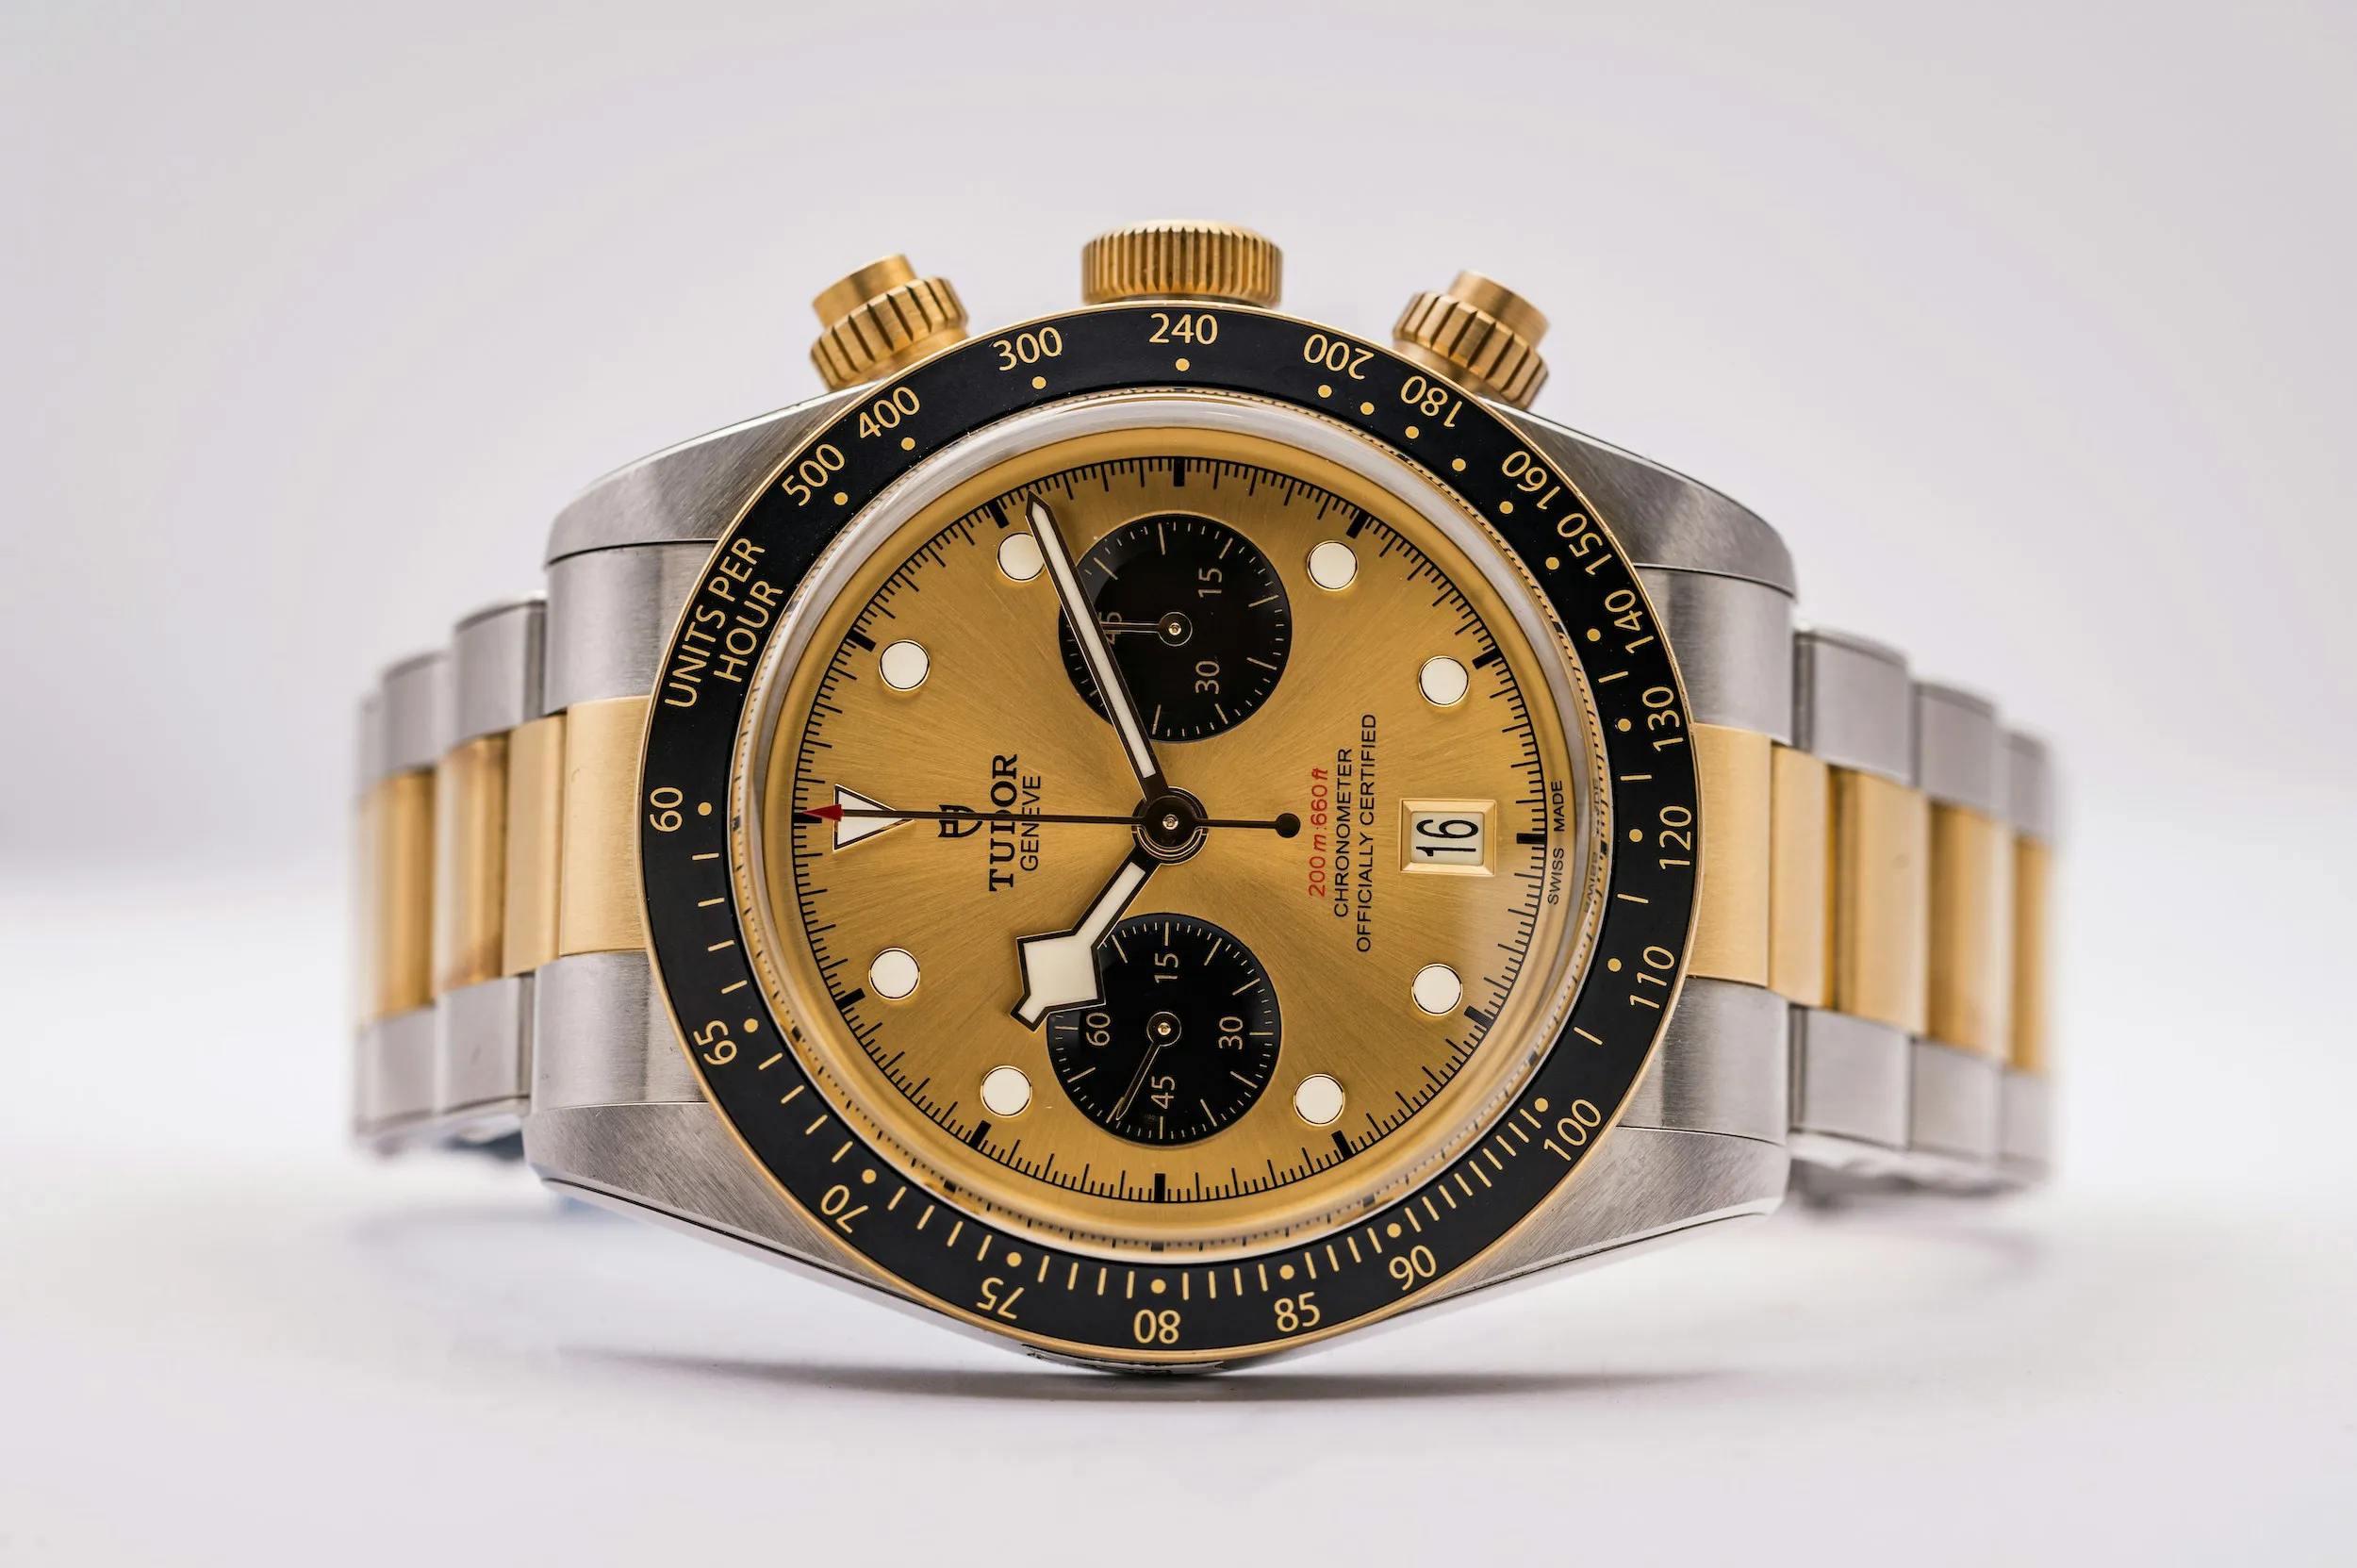 Tudor Black Bay Chrono S&G  M7936N-0007 41mm Yellow gold and stainless steel Golden 5